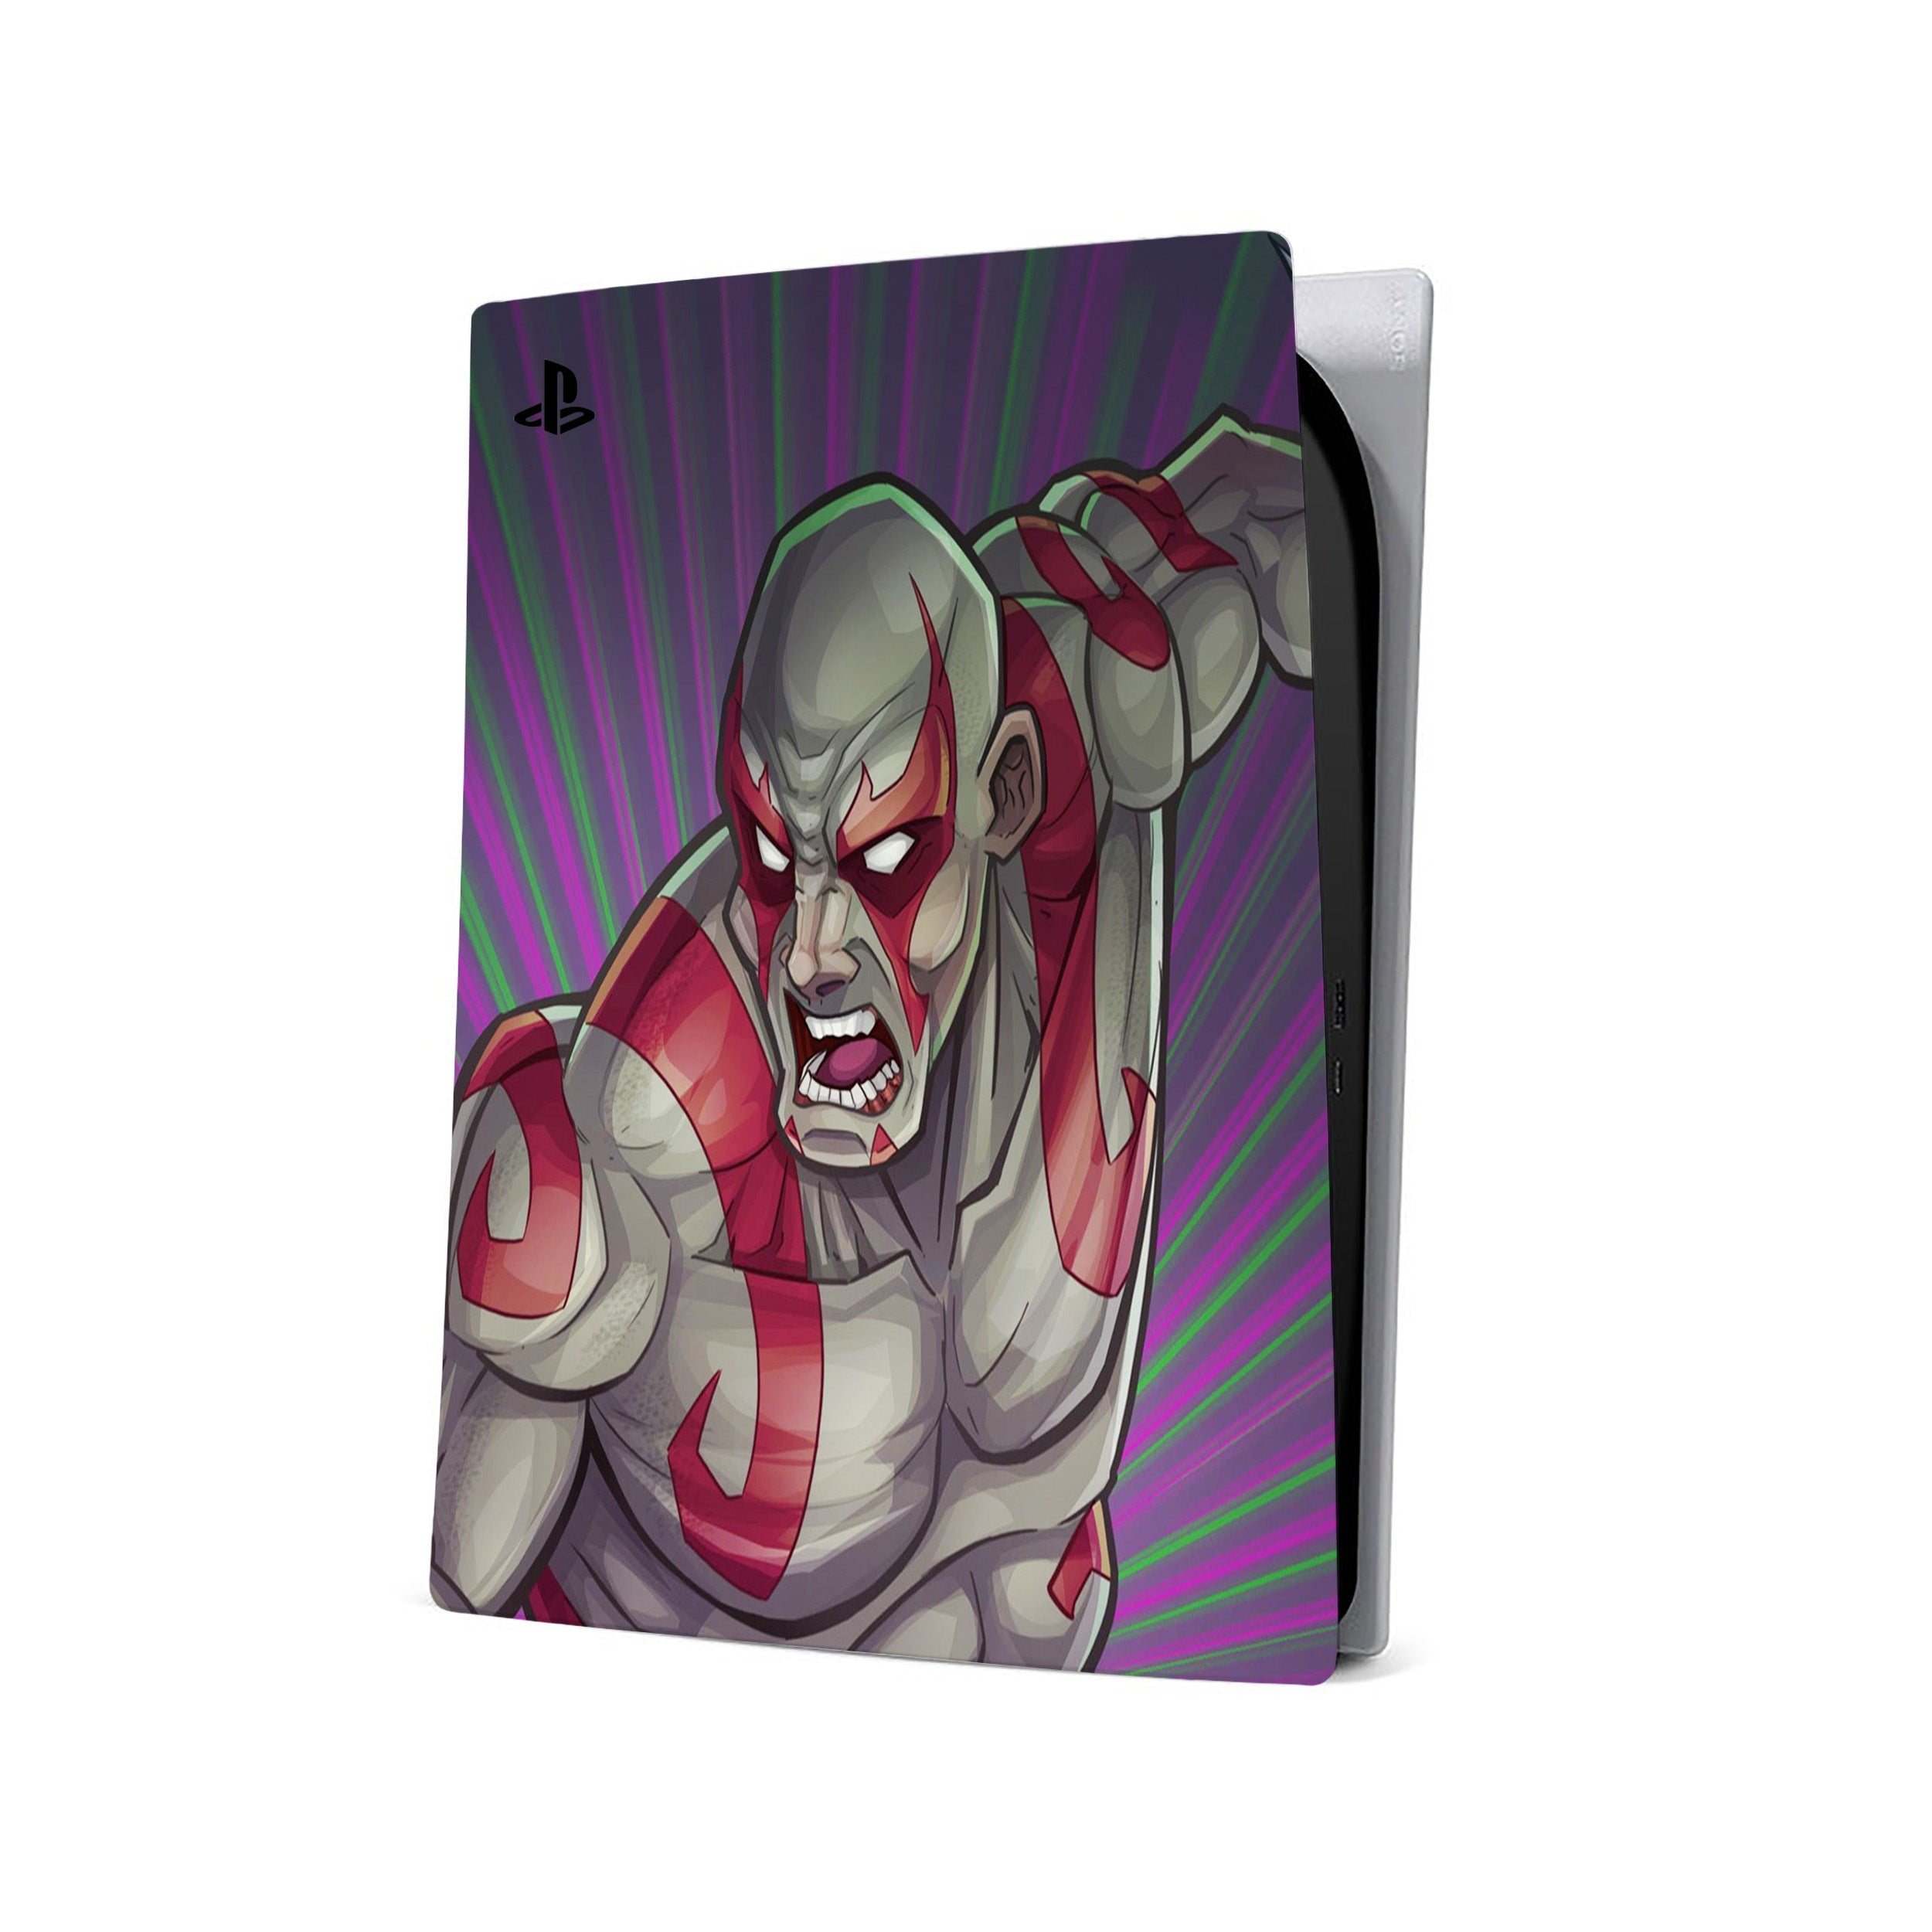 A video game skin featuring a Marvel Guardians of the Galaxy Drax design for the PS5.